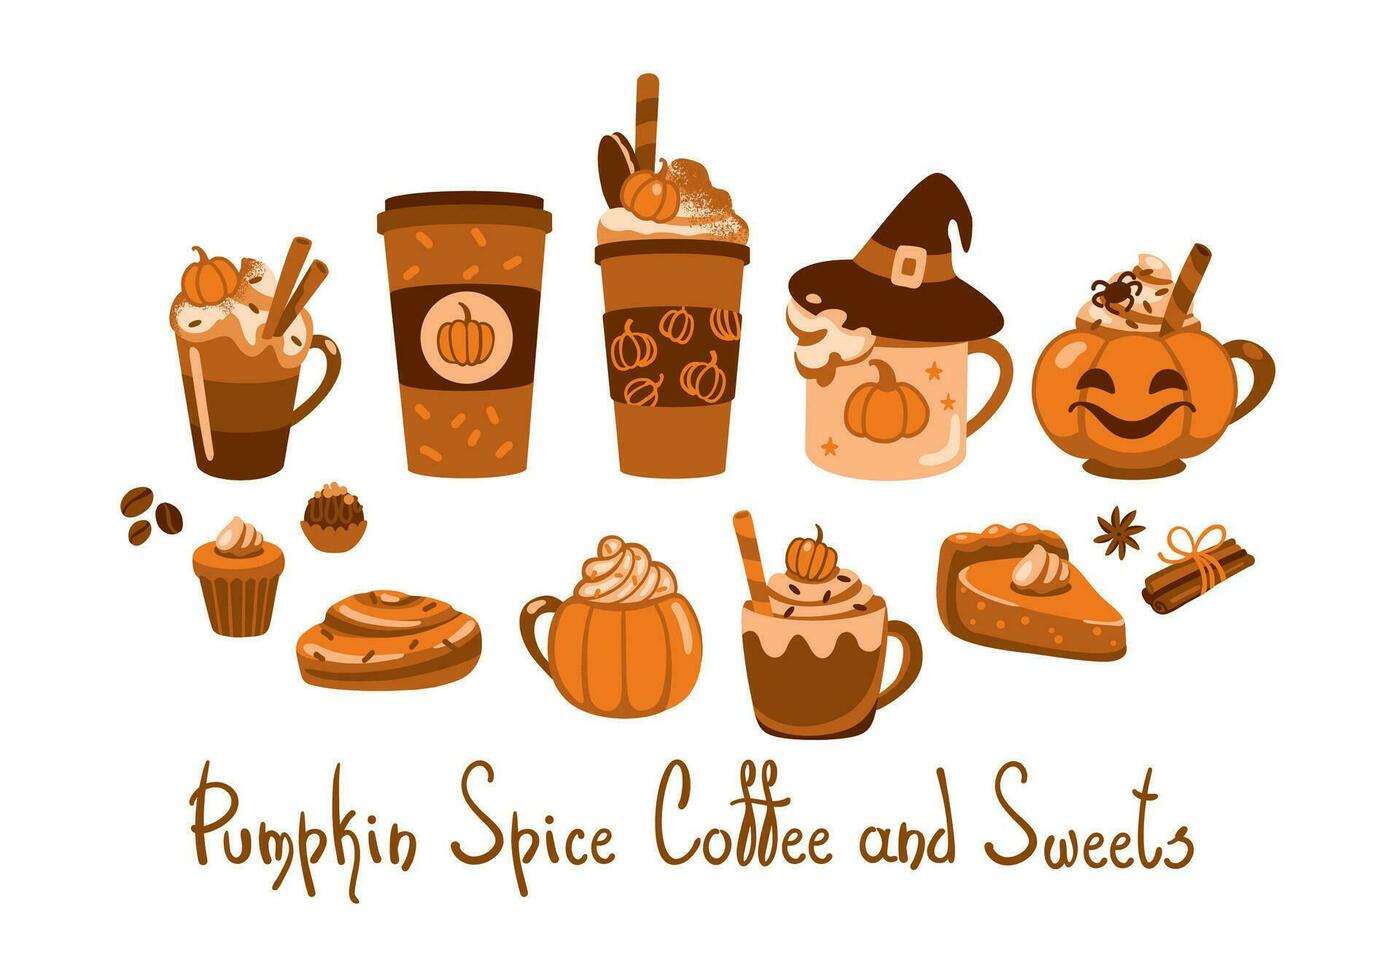 Pumpkin Spice coffee. Different types coffee on cute cups. Autumn mood. Set of illustrations vector